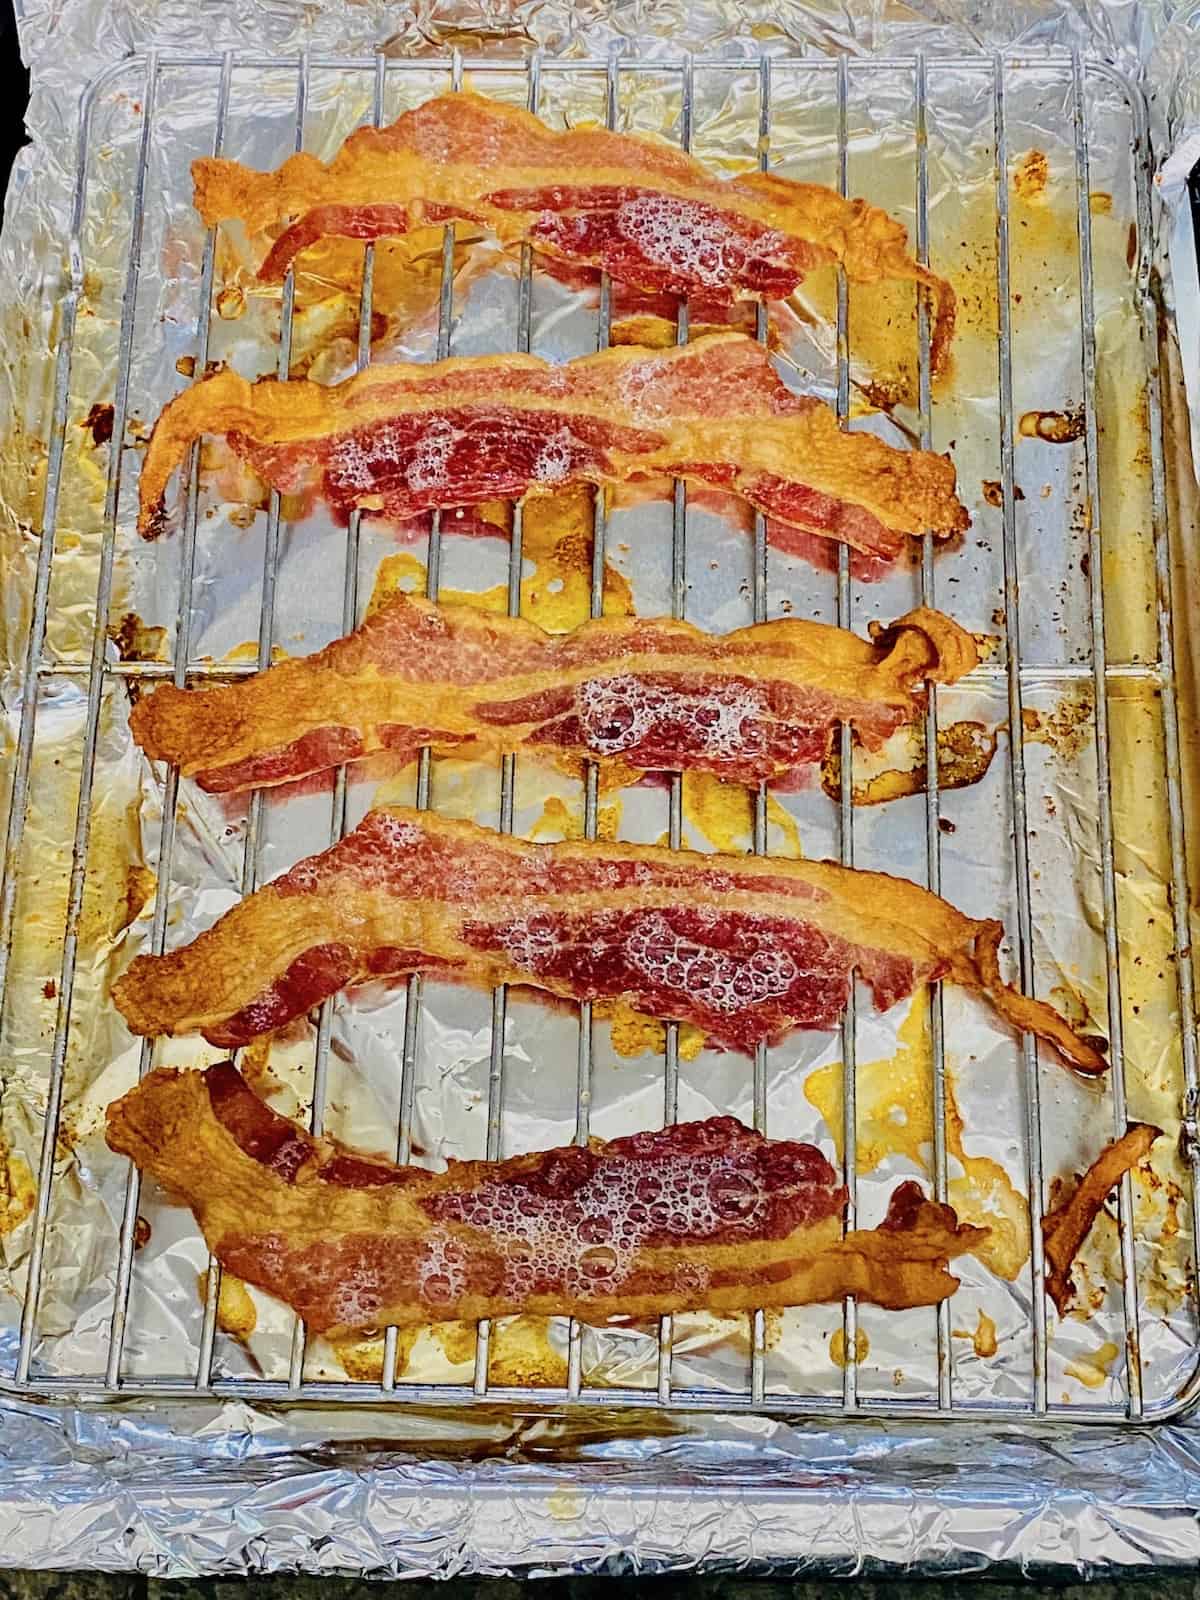 bacon cooked 18 minutes.